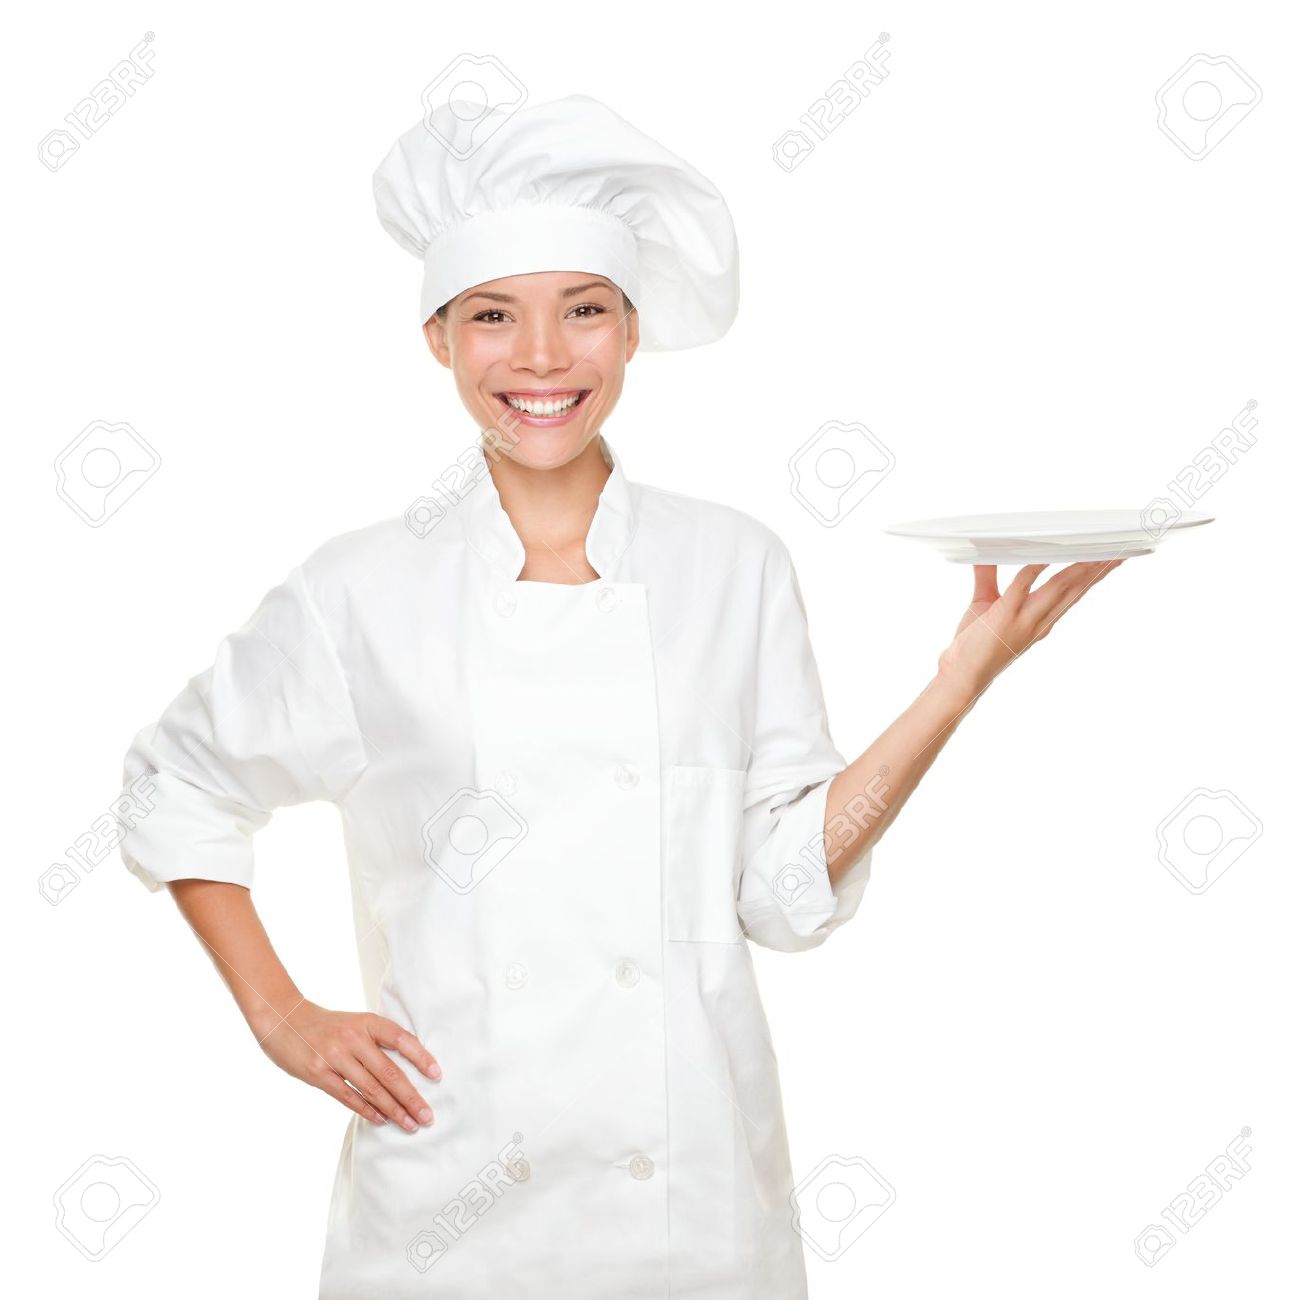 Asian Chef PNG - 167518